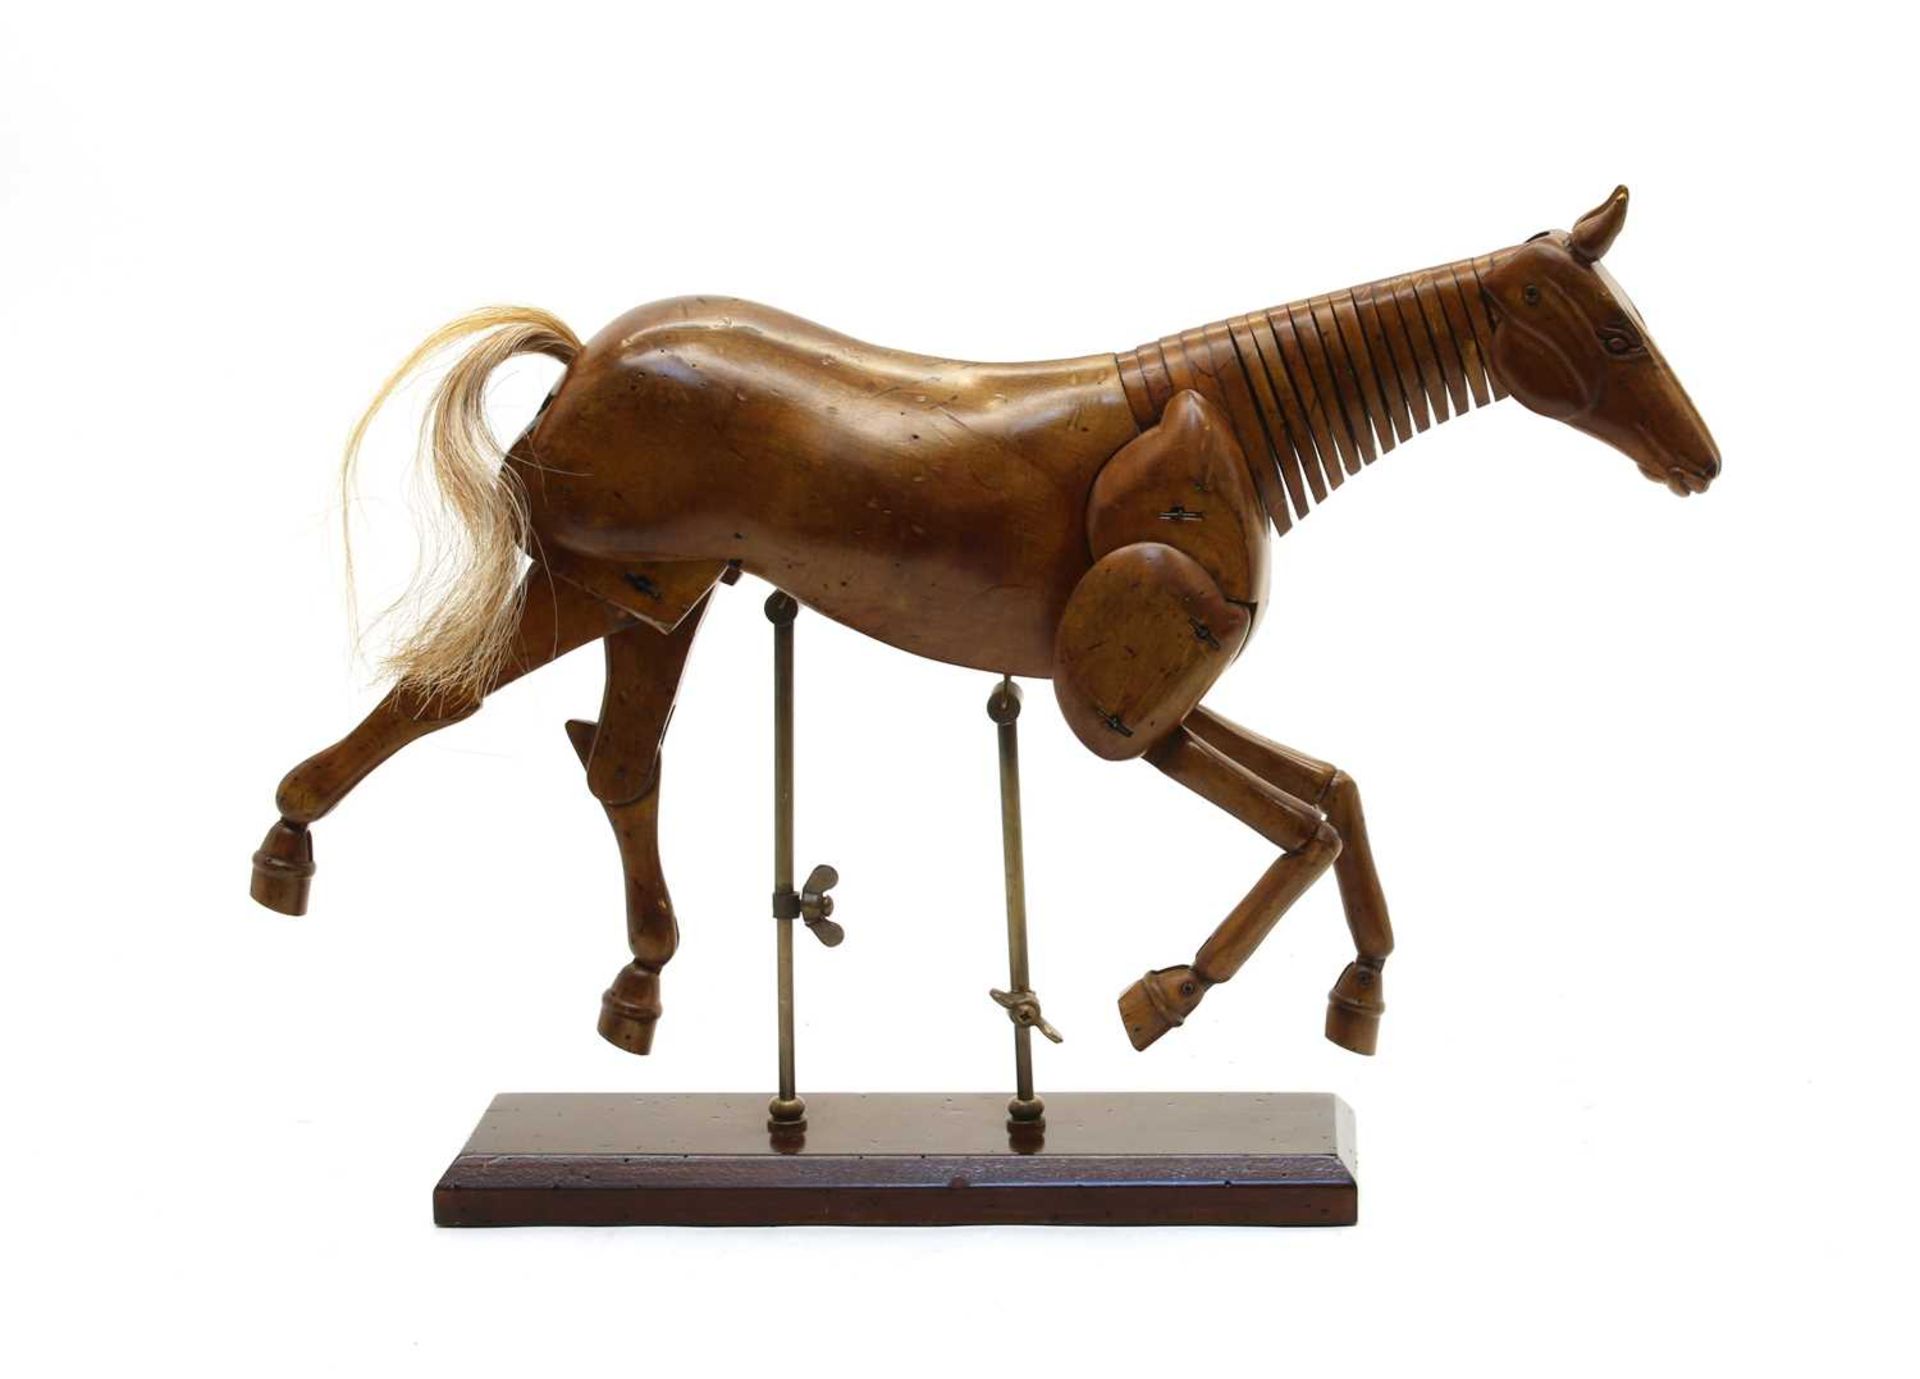 A carved wooden articulated horse